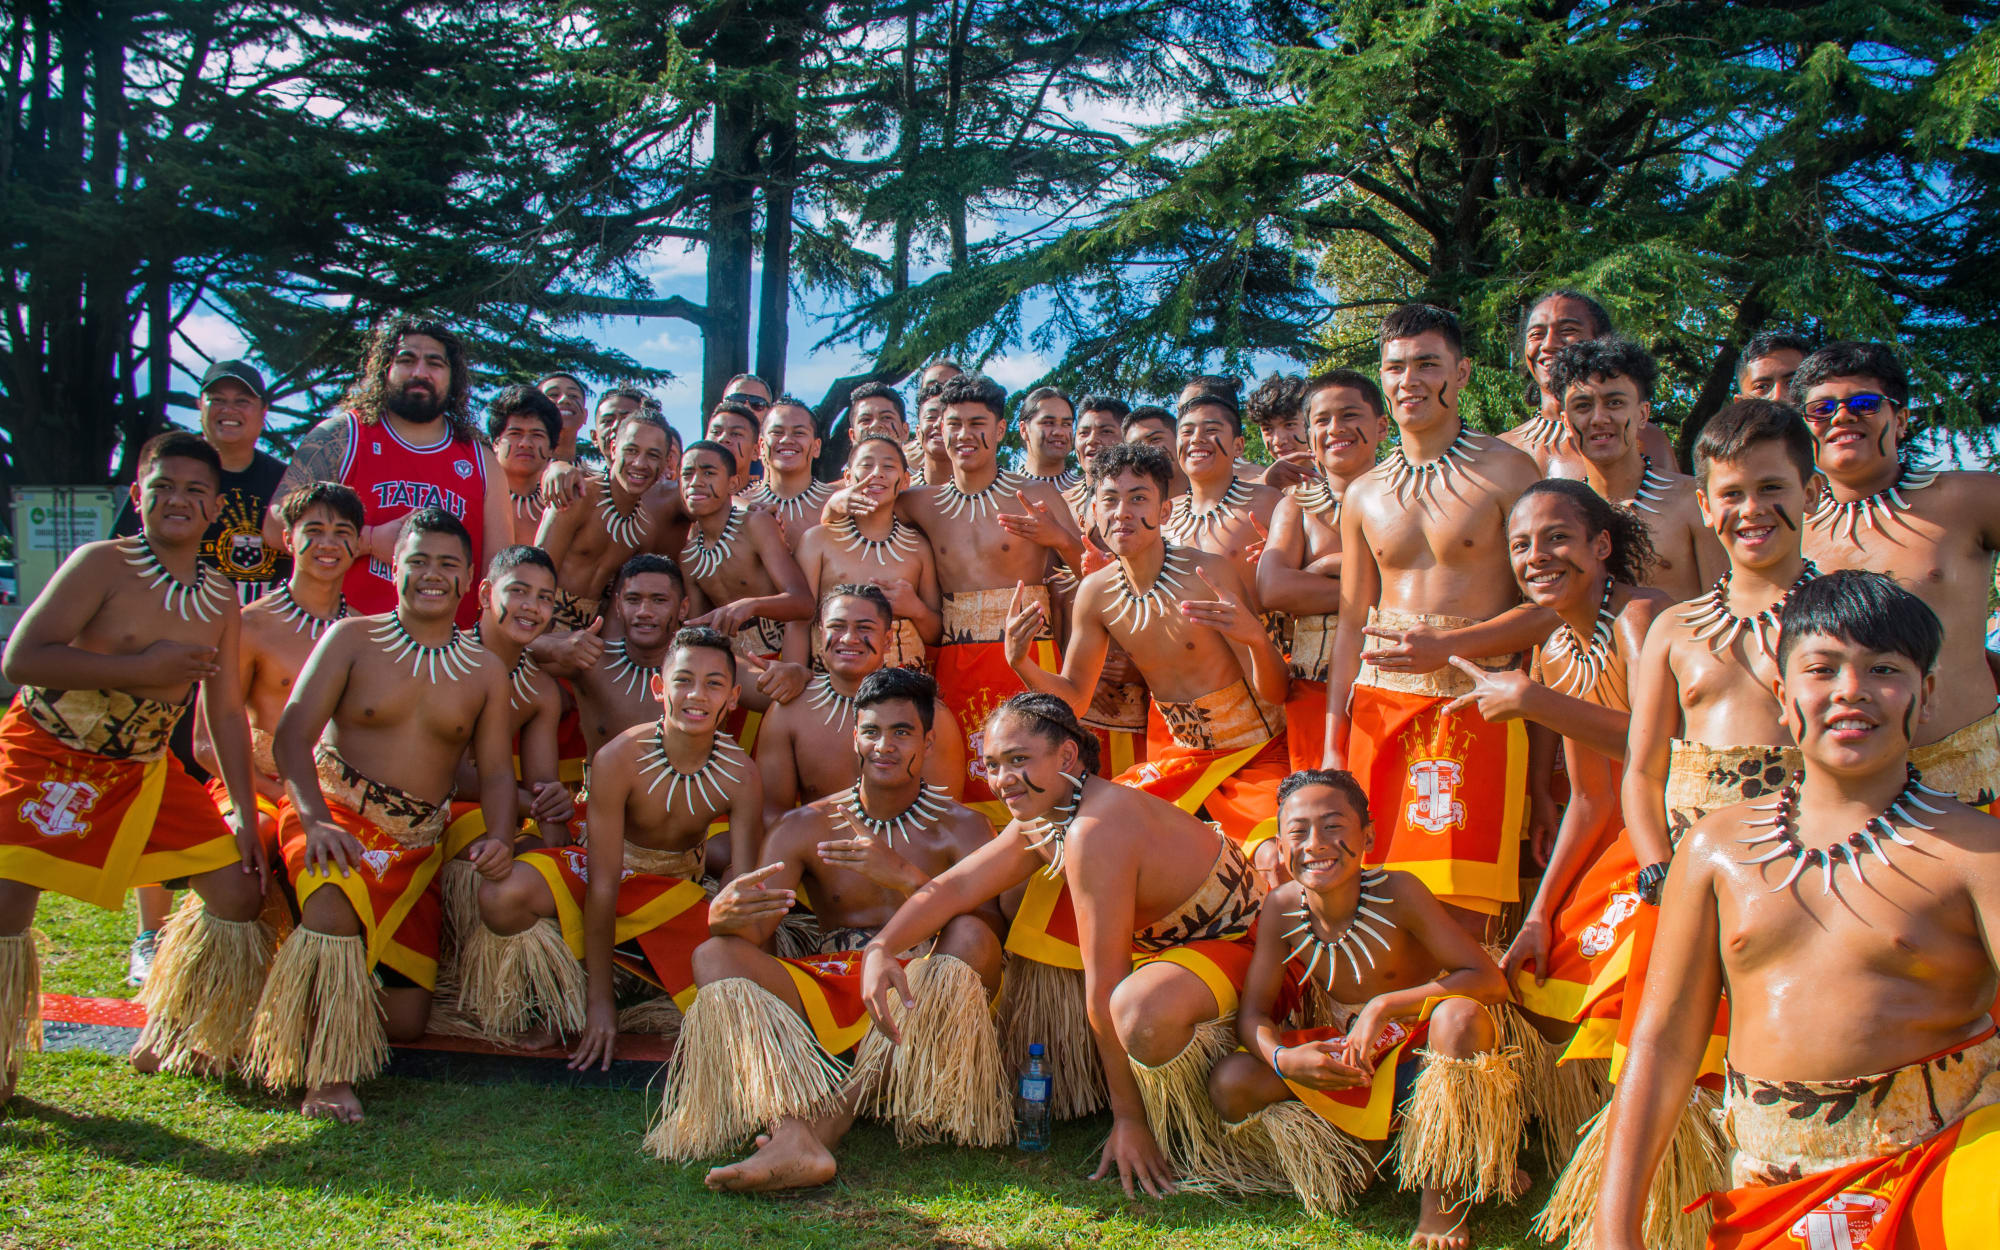 St Paul's College Samoan Group after performing at Polyfest 2018